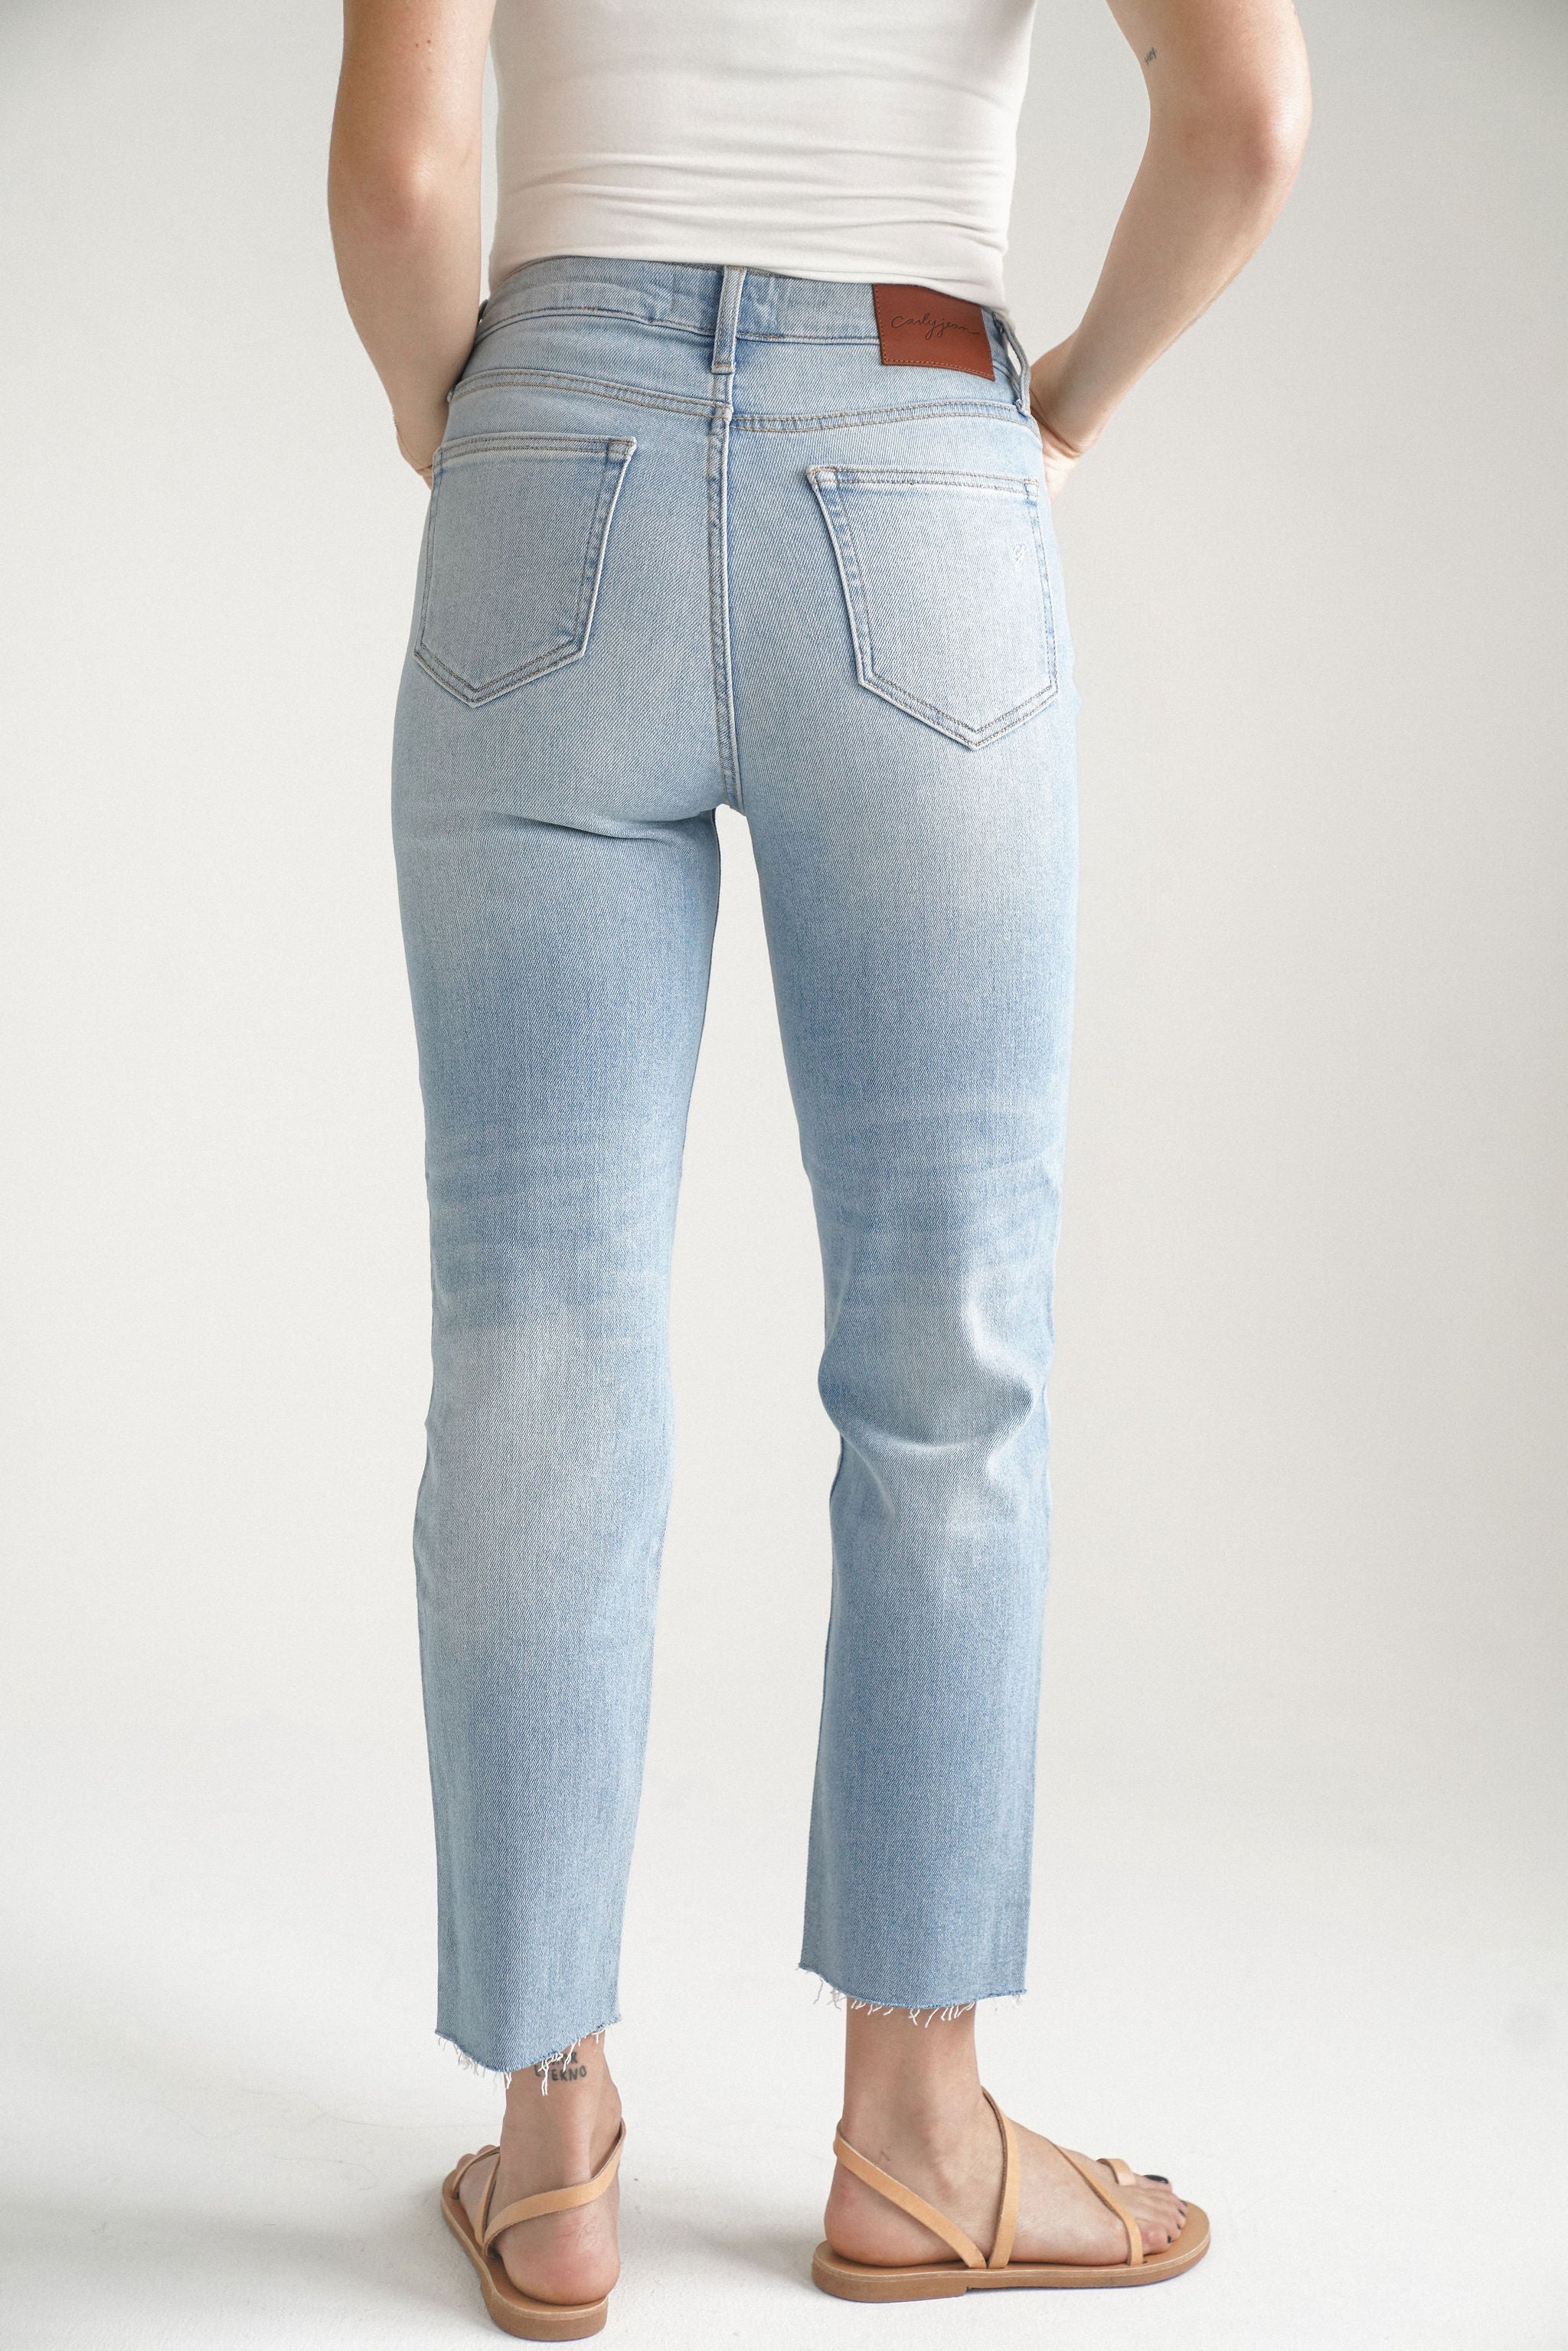 Chrissy Classic Straight Leg Jeans– CARLY JEAN LOS ANGELES